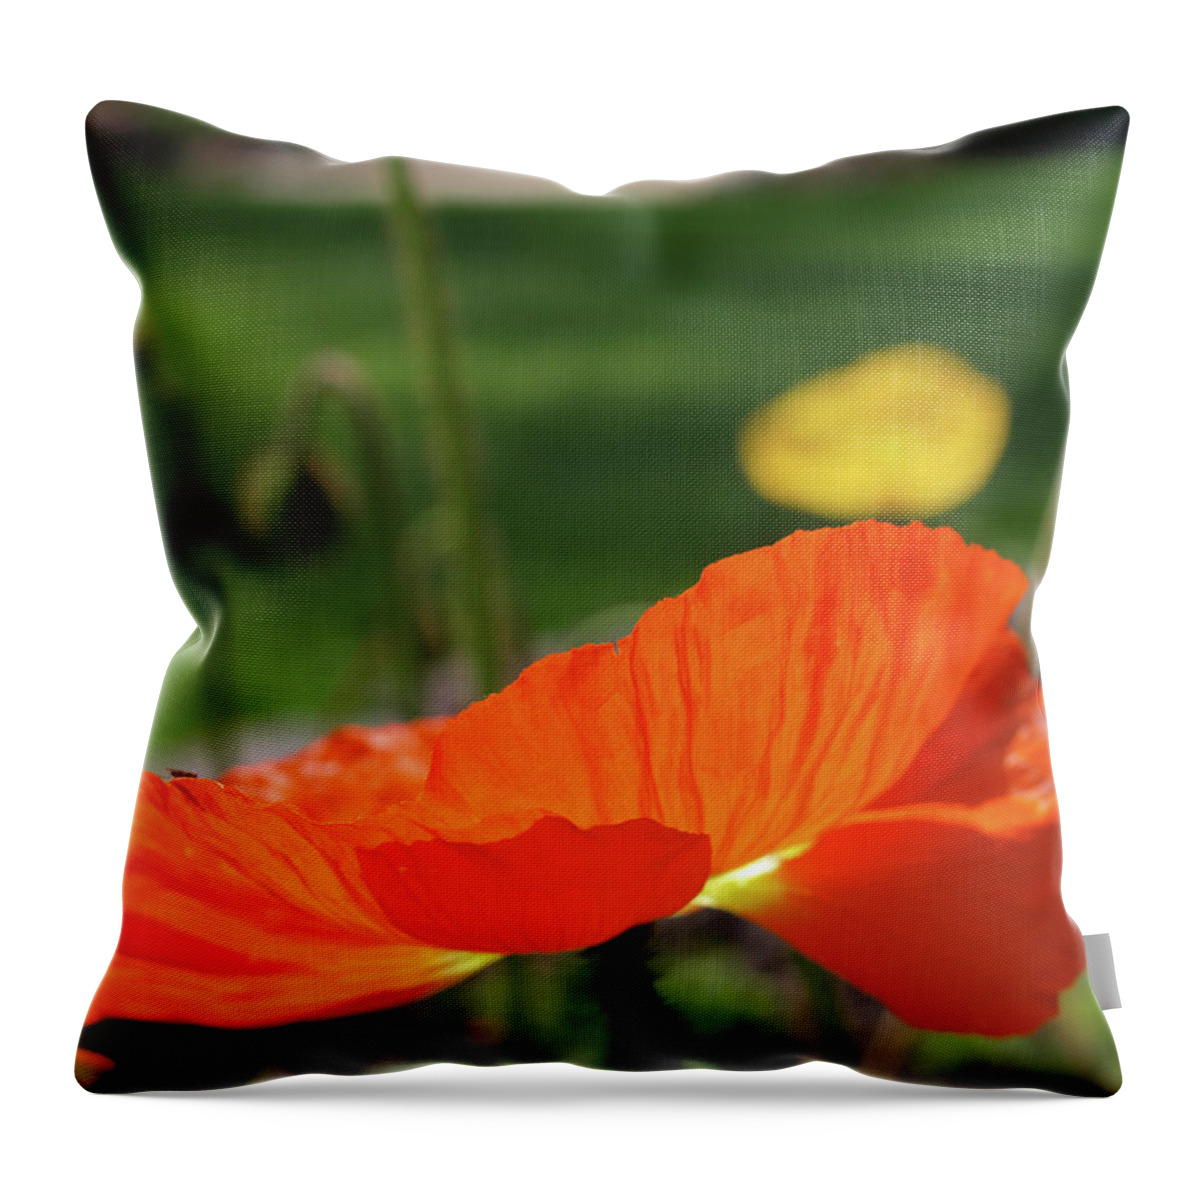 Poppy Throw Pillow featuring the photograph Poppy Cup by Evelyn Tambour